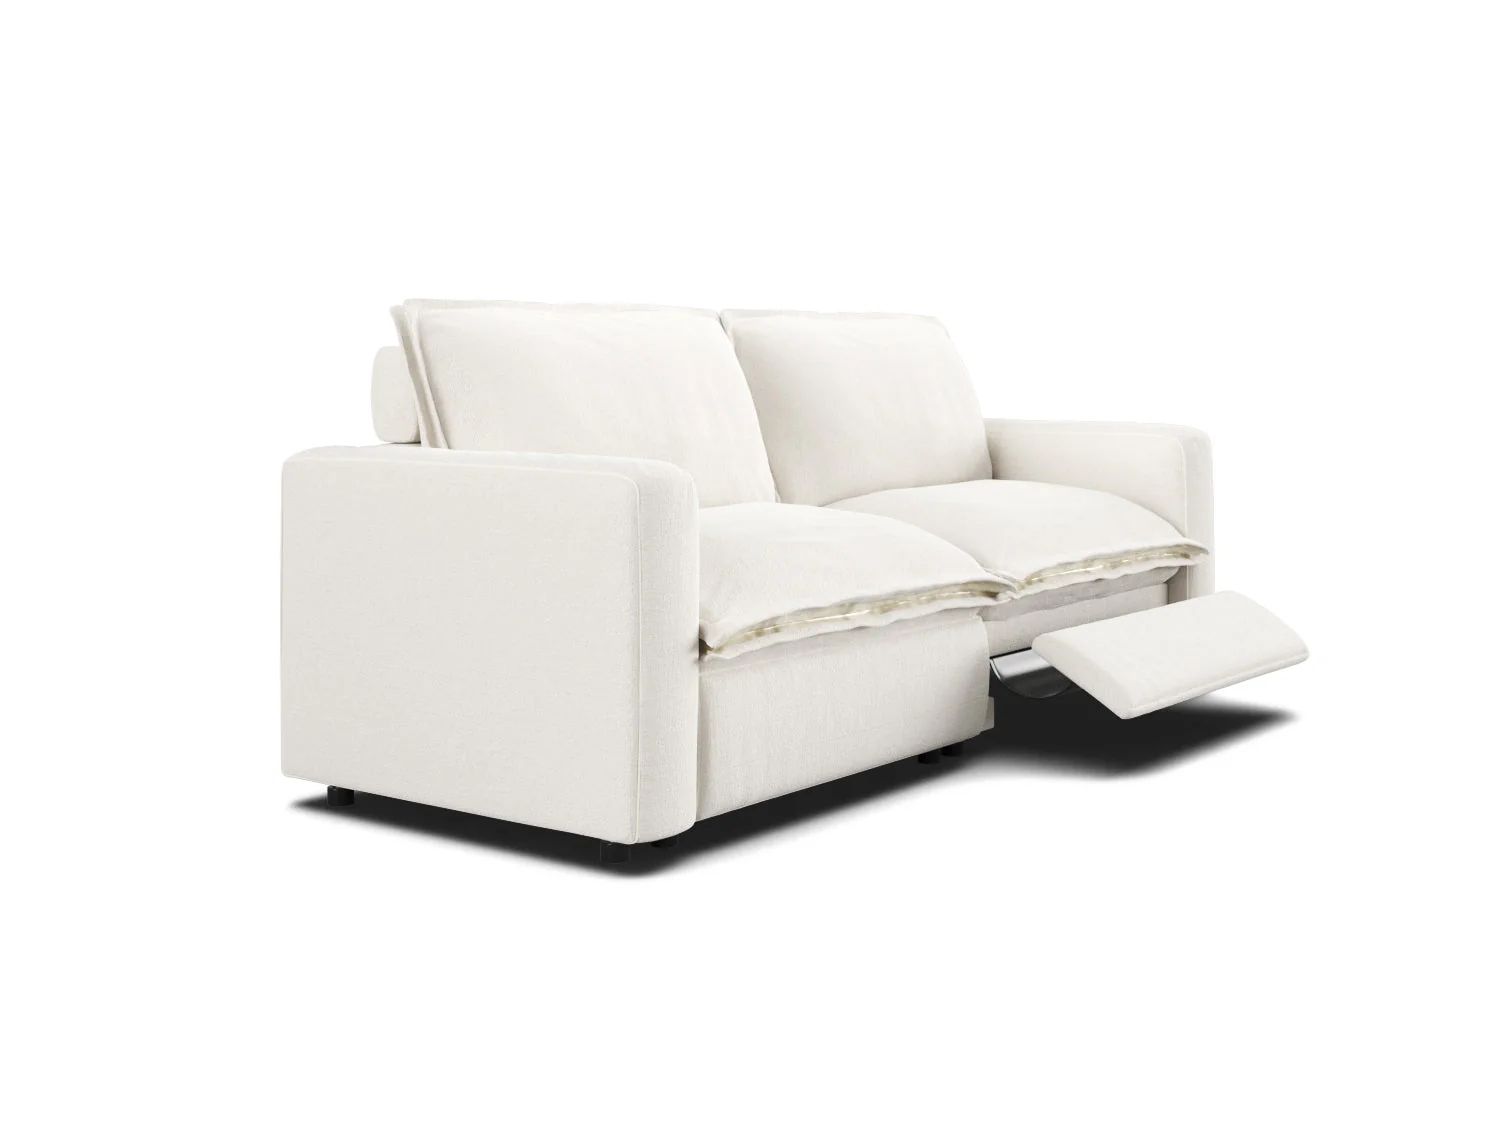 Coconut 2 Seat Sectional with 2 Recliners | Homebody